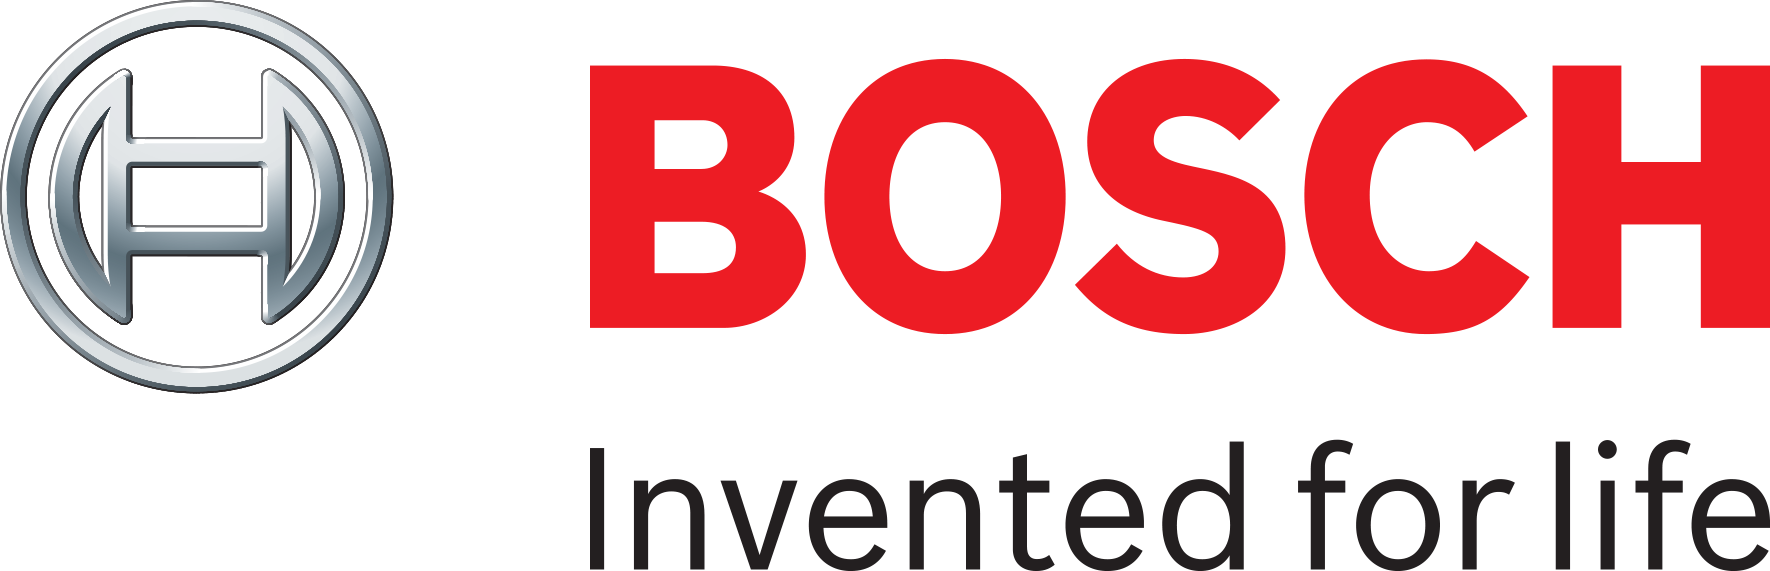 Bosch Connected Devices and Solutions LOGO